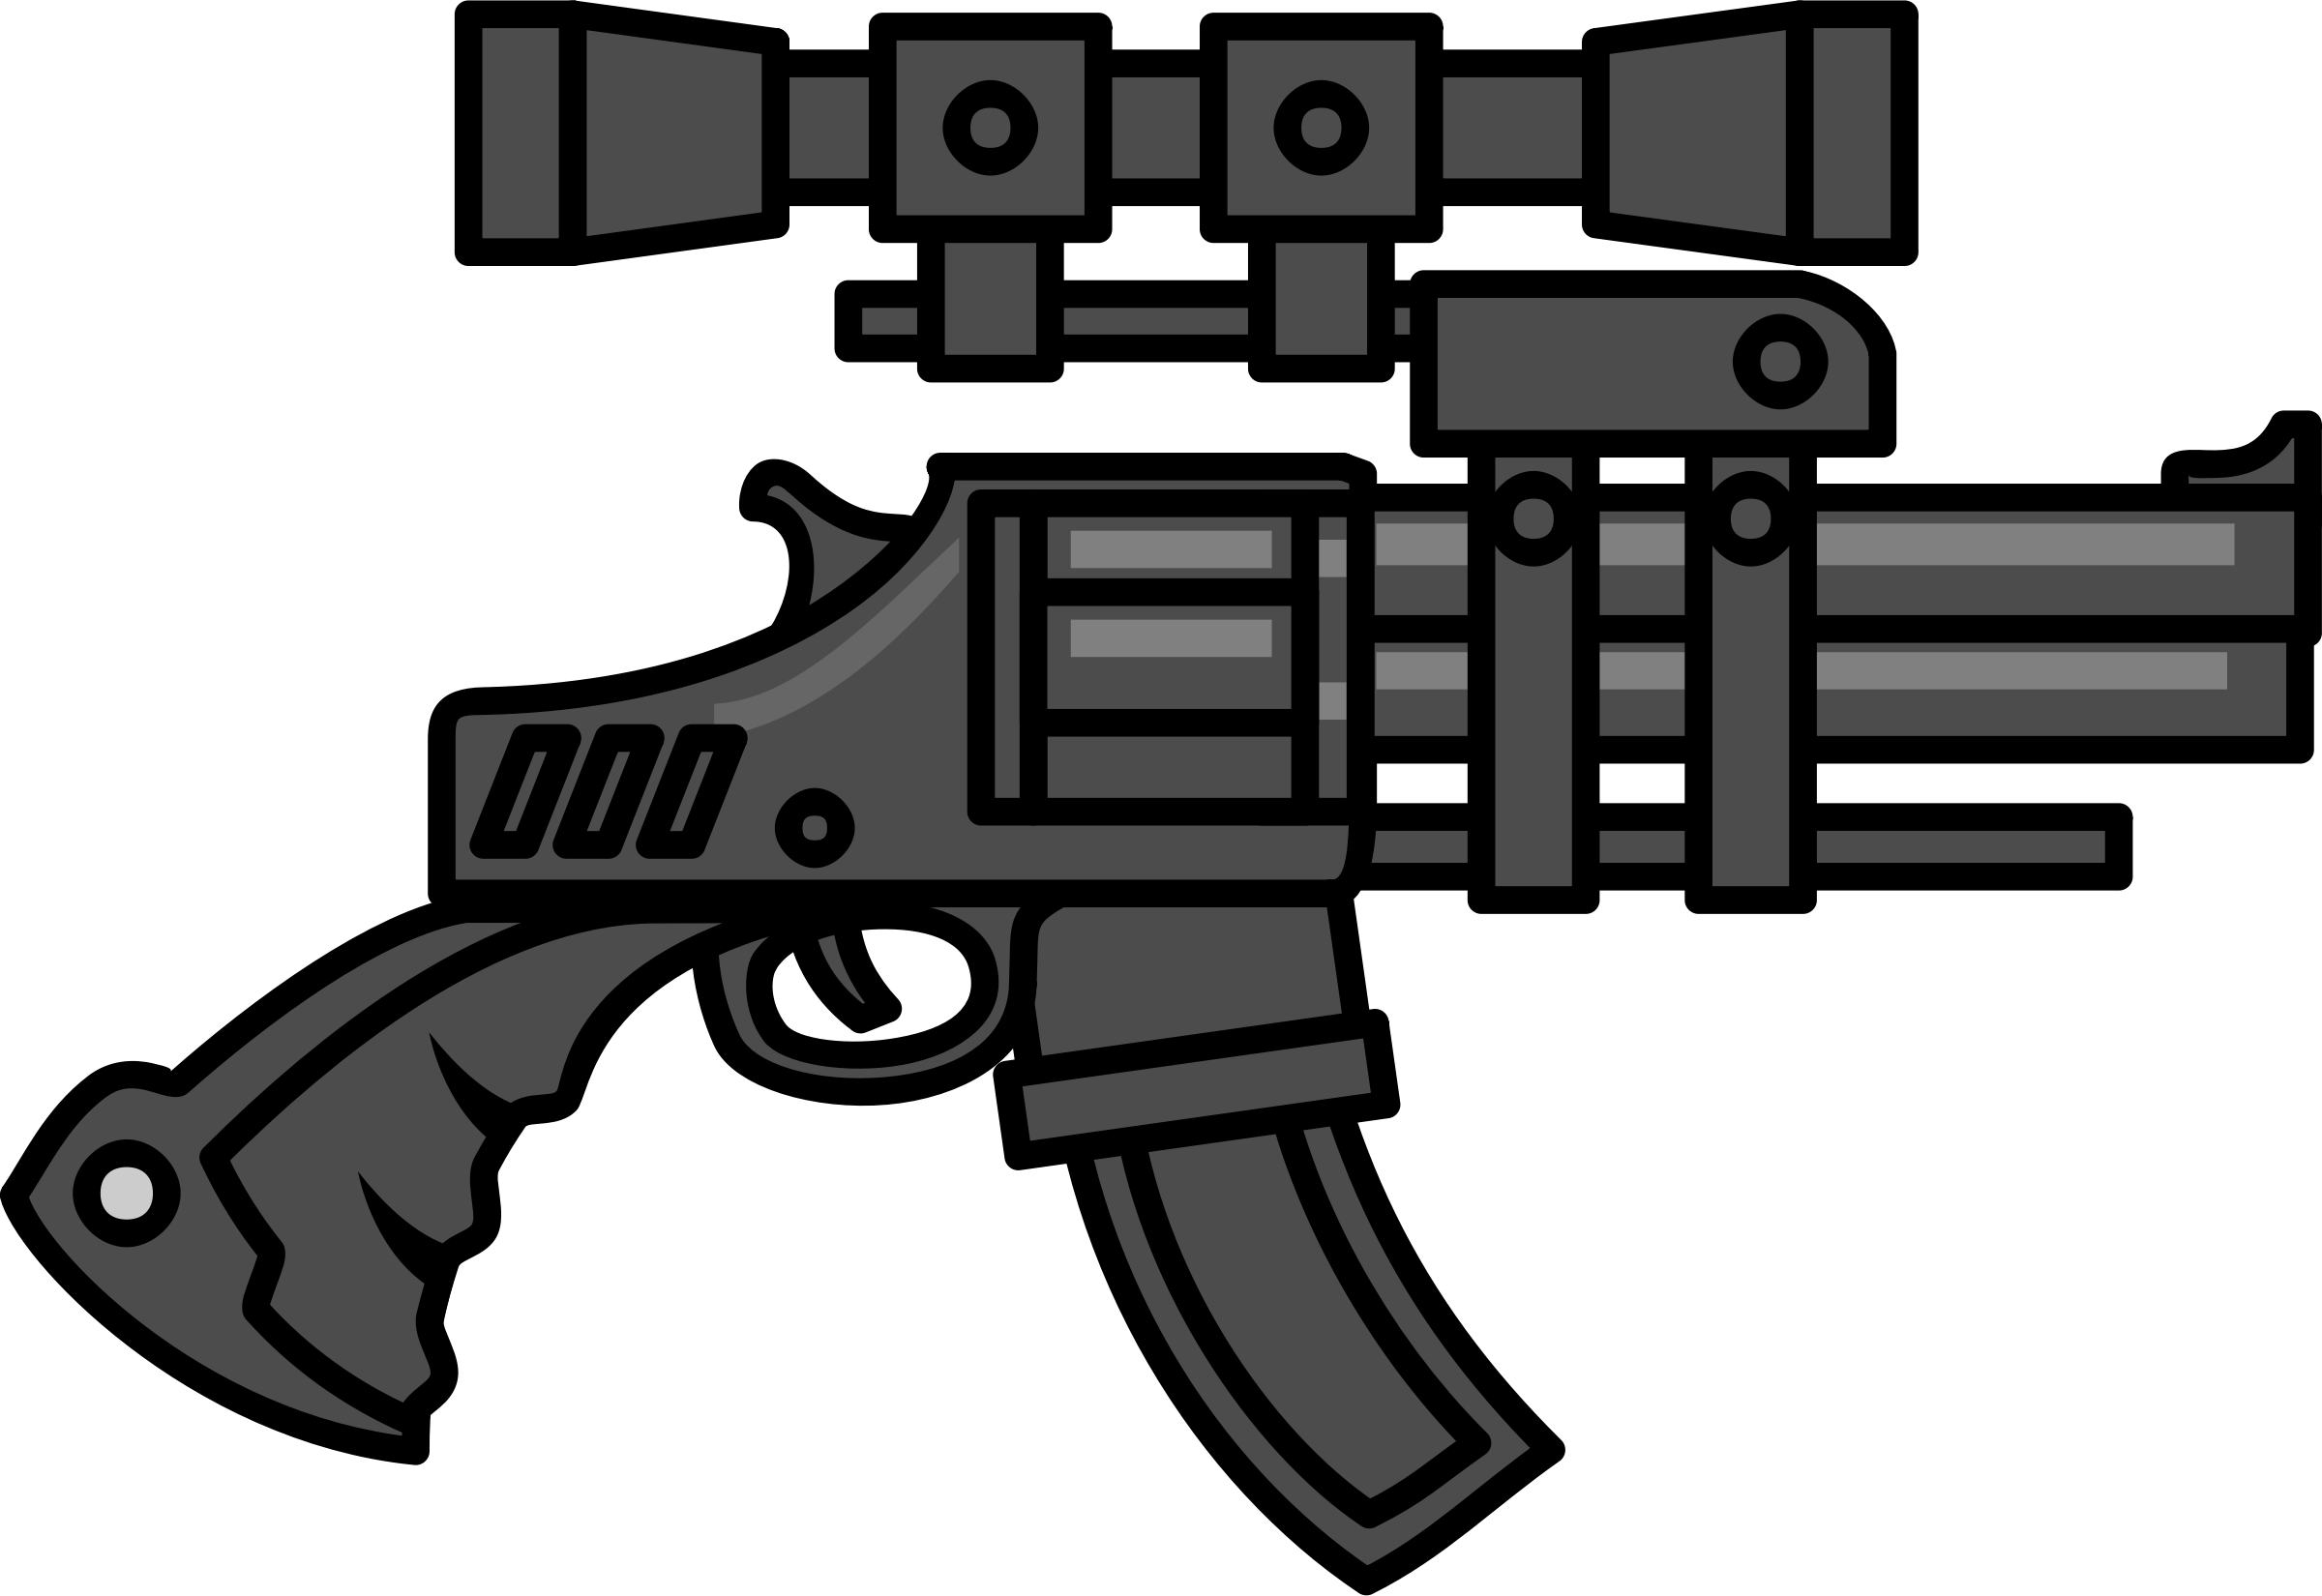 Big Gun with Scope vector clipart image - Free stock photo